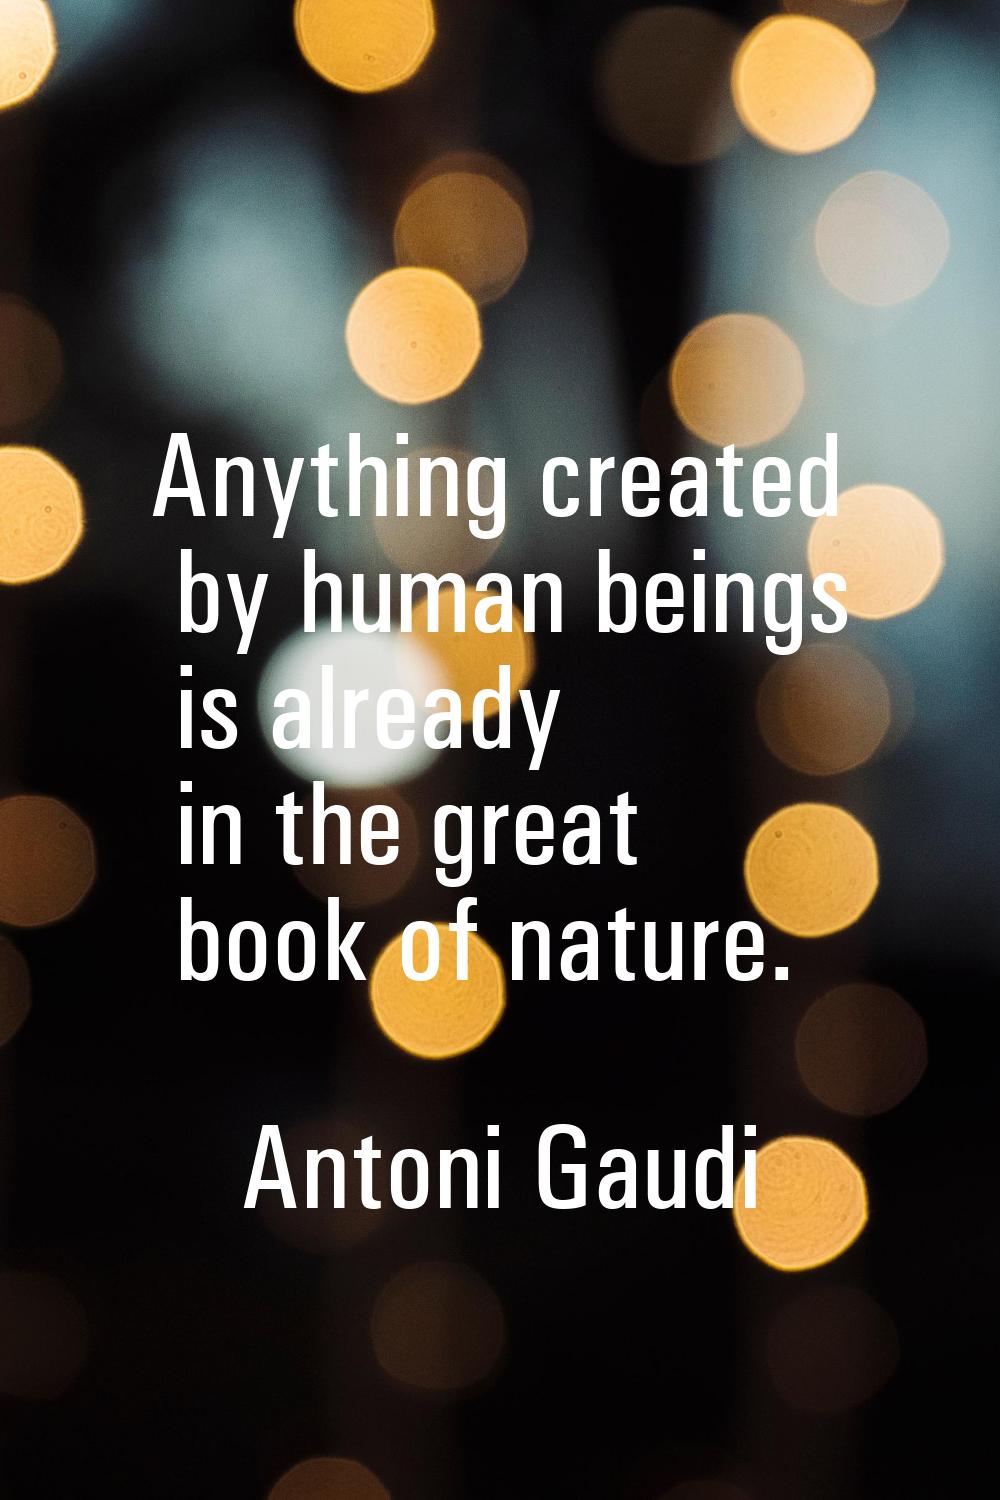 Anything created by human beings is already in the great book of nature.